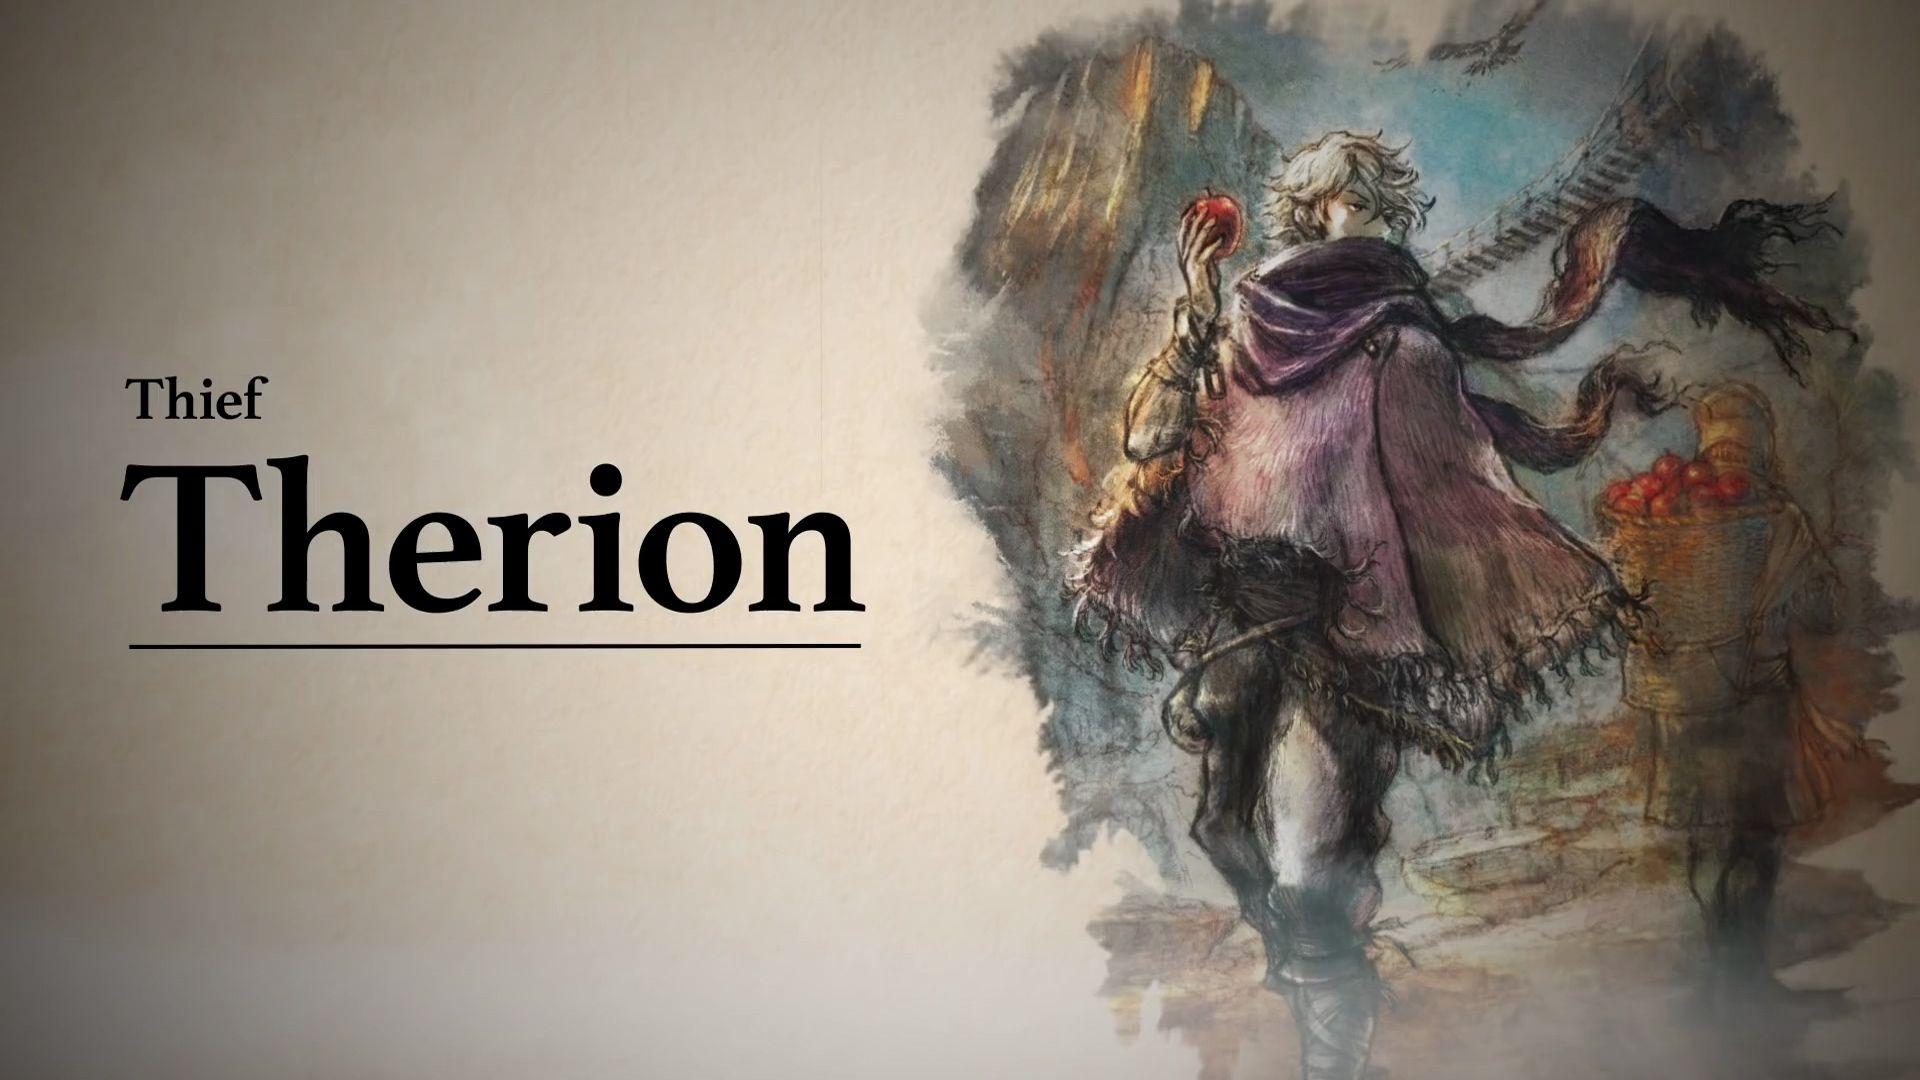 Thief Therion. Wallpaper from Octopath Traveler